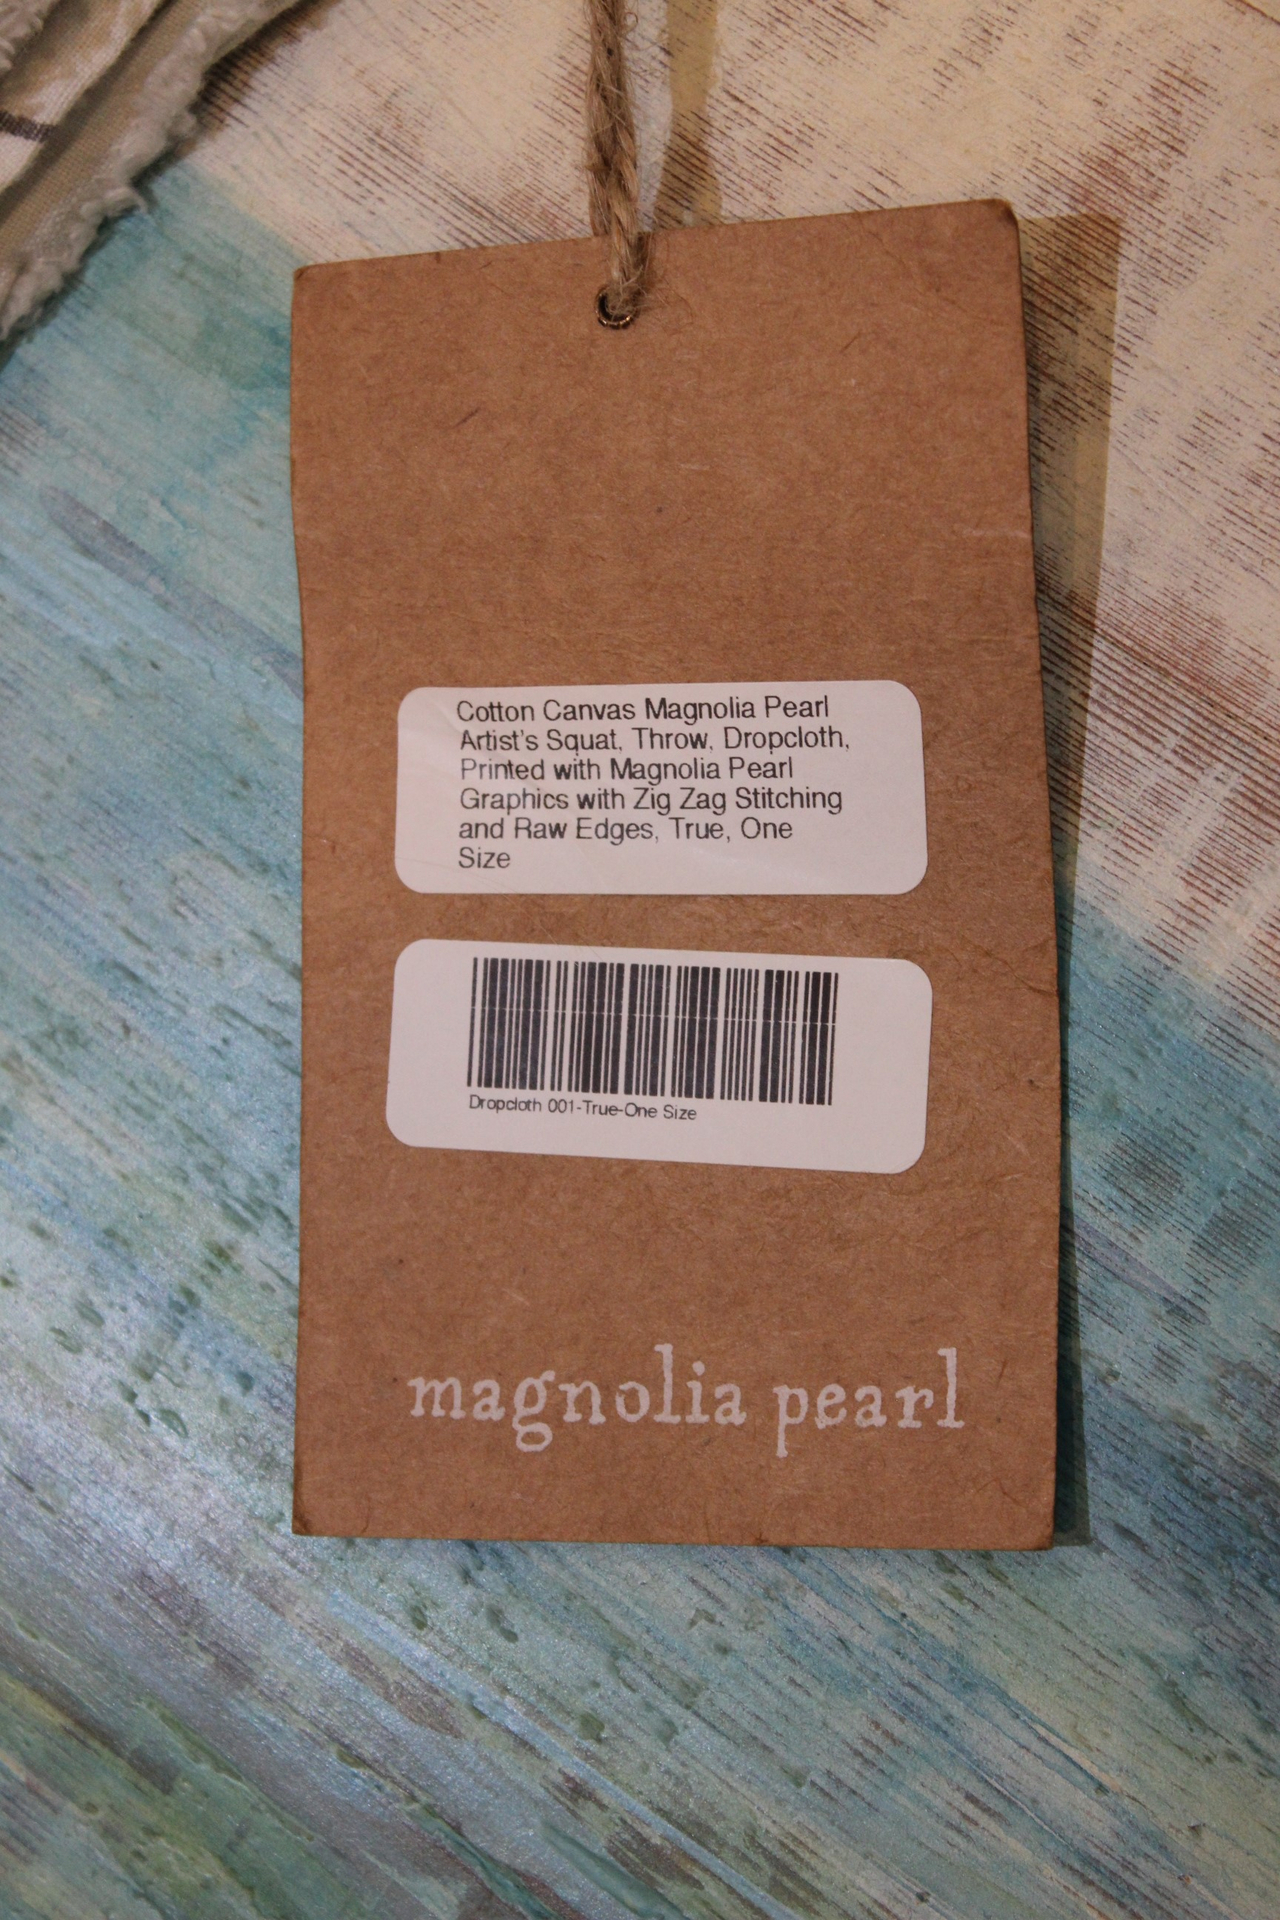 Super Rare and Long Retired Magnolia Pearl Art Graphic Cotton Drop Cloth - New with Tag!